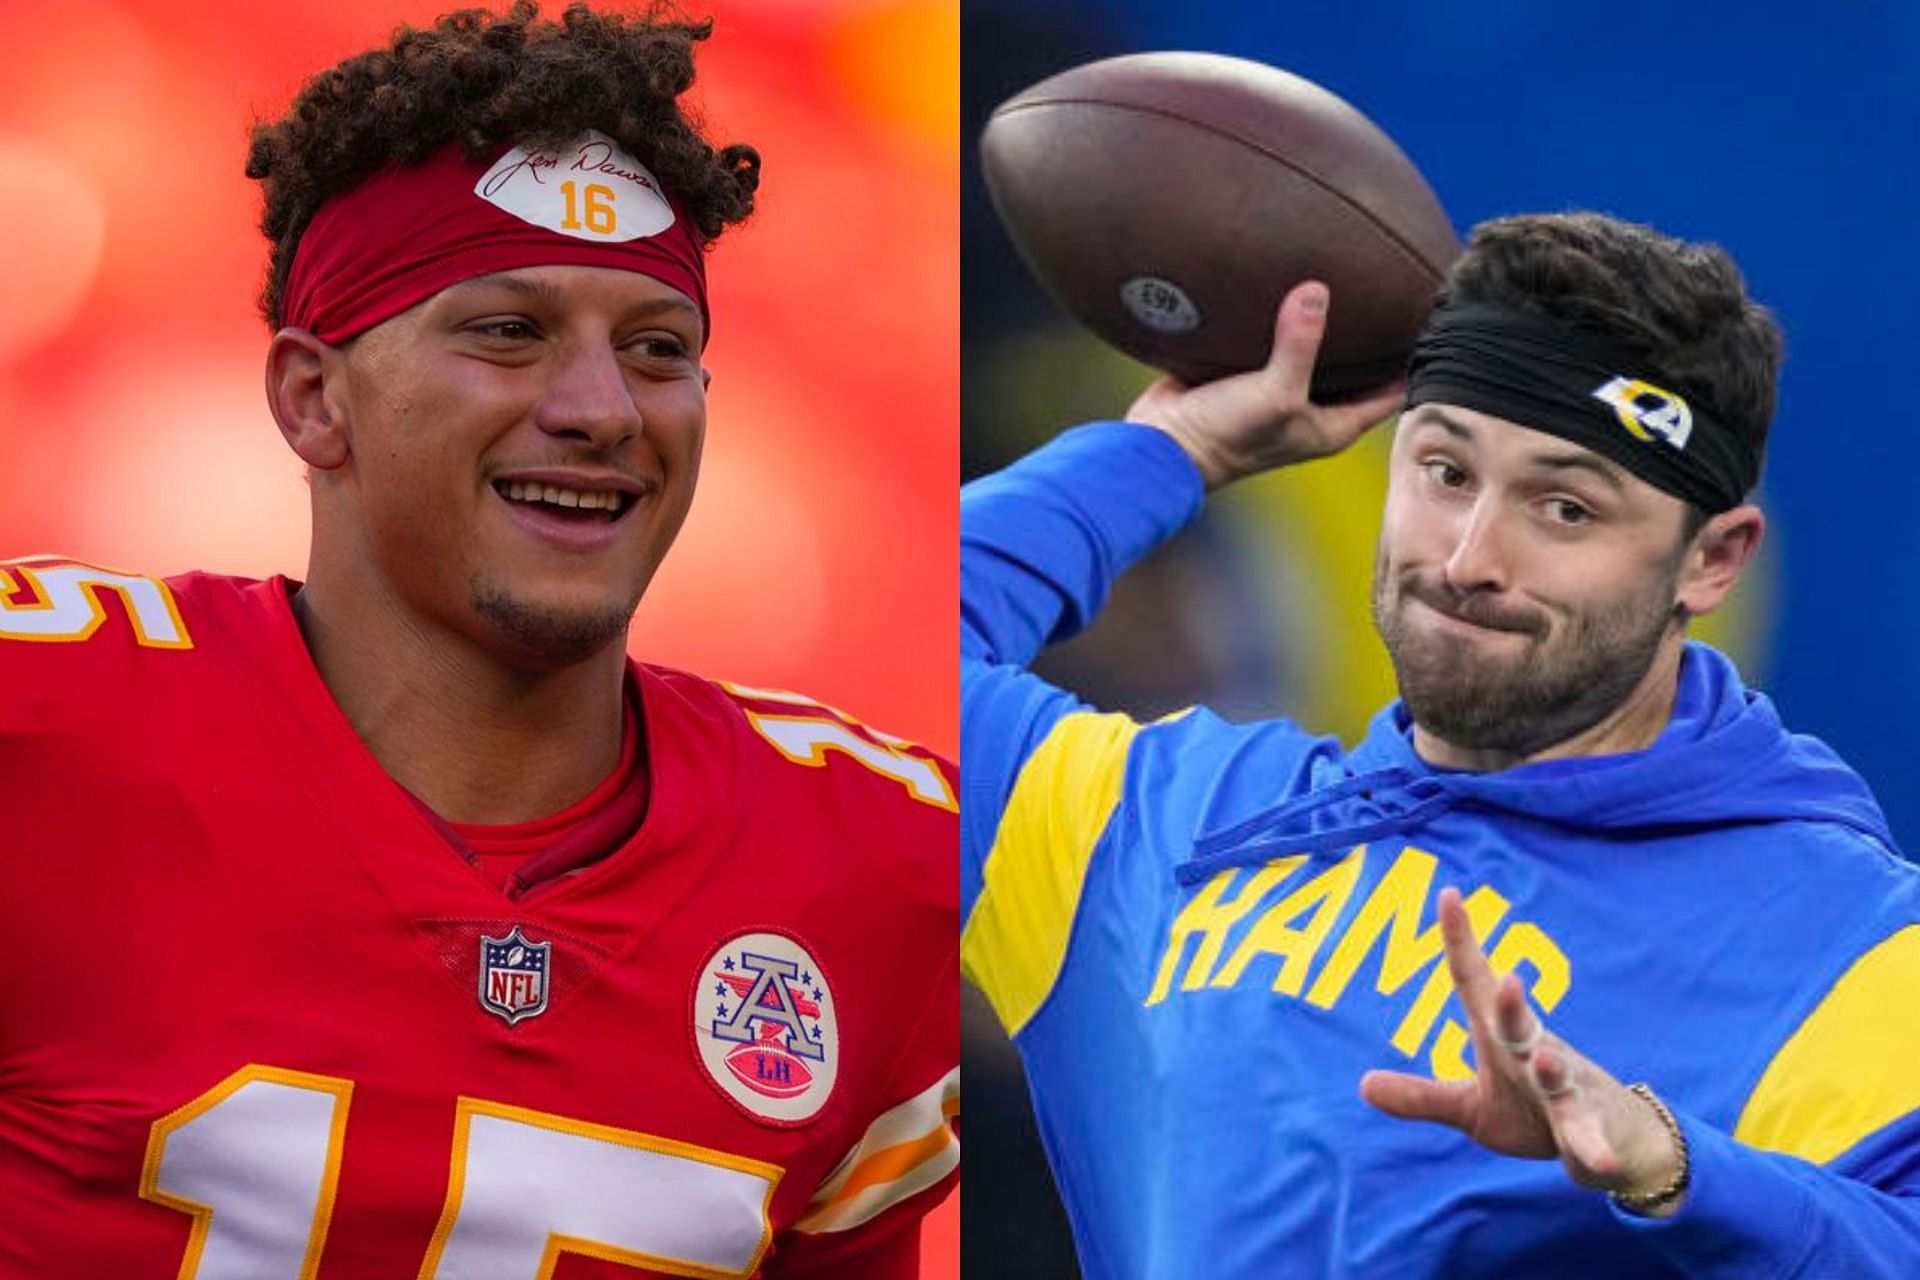 Patrick Mahomes and Baker Mayfield once had the craziest college